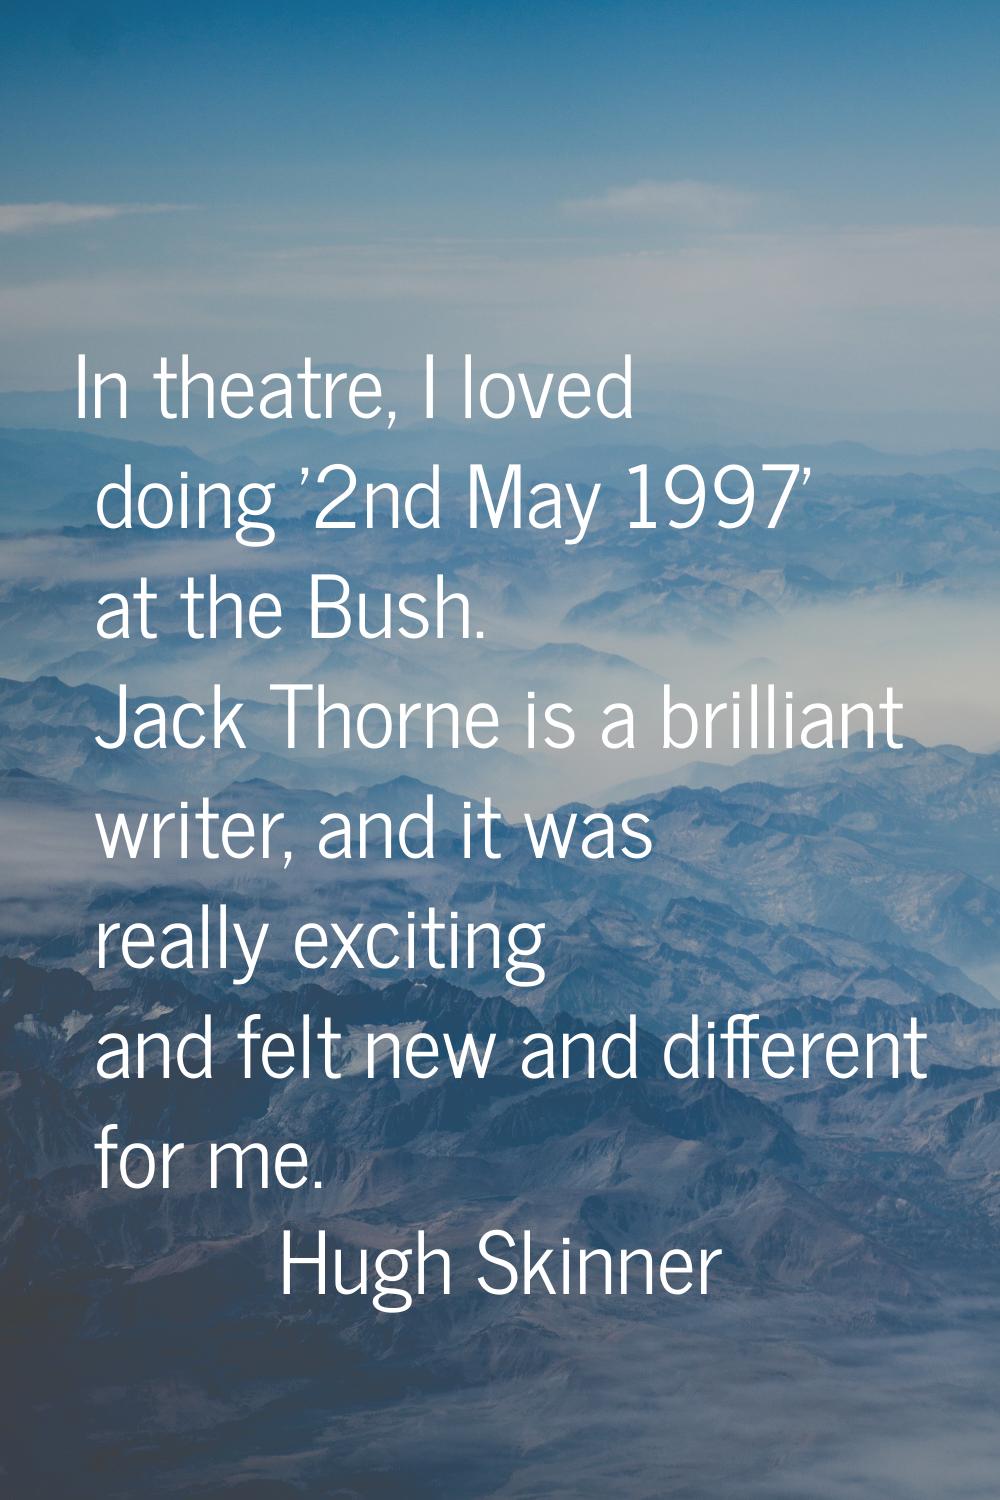 In theatre, I loved doing '2nd May 1997' at the Bush. Jack Thorne is a brilliant writer, and it was